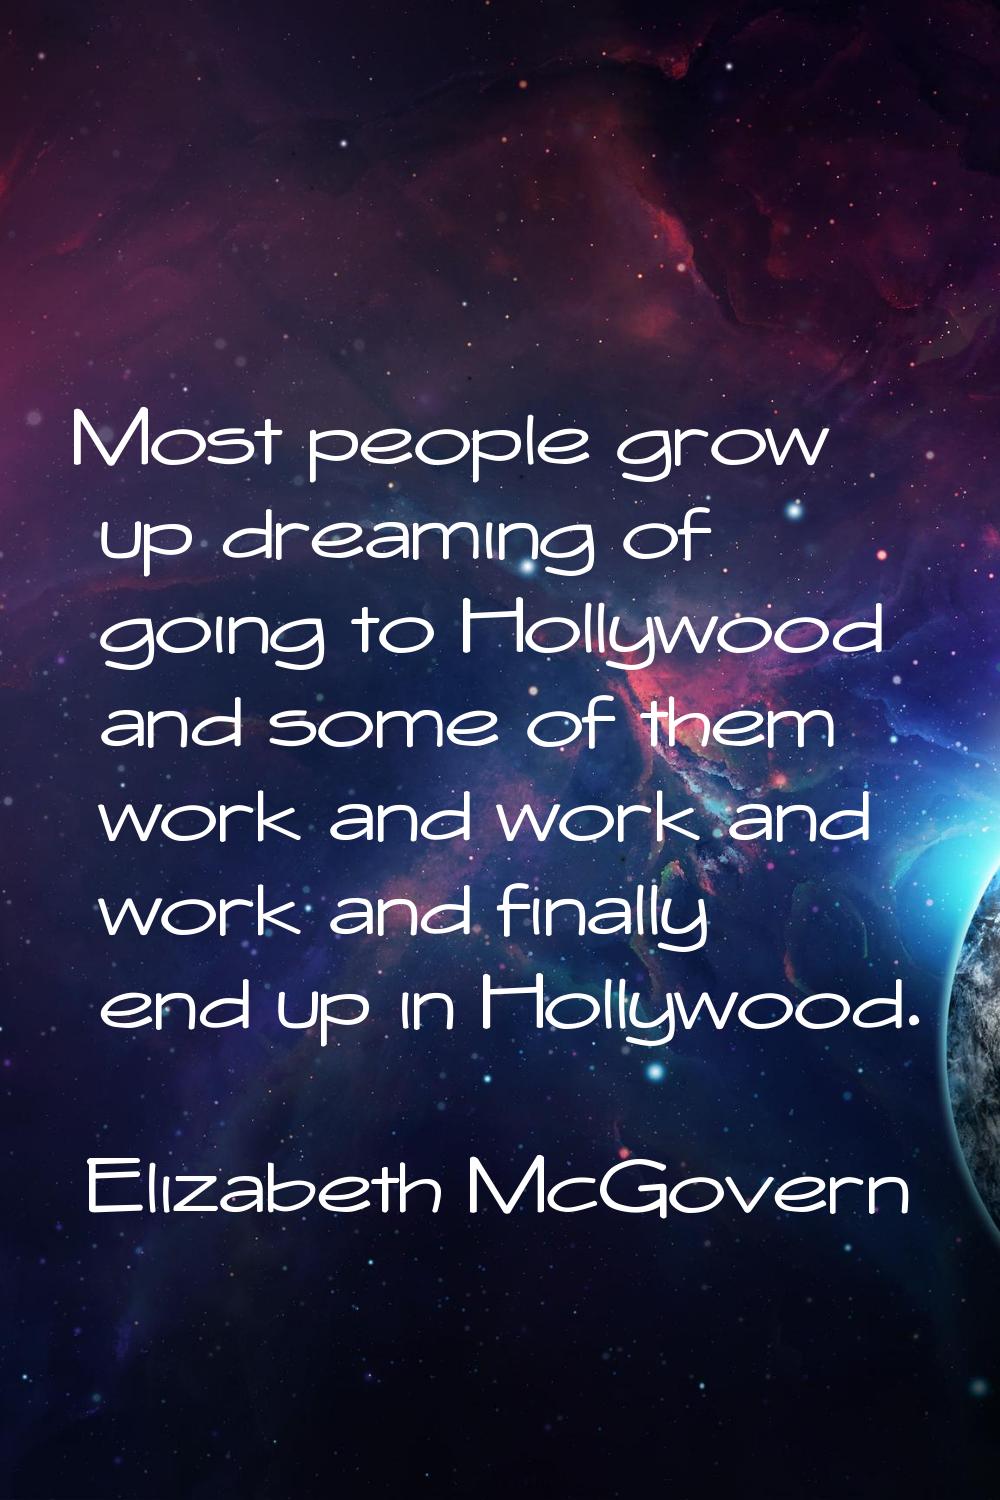 Most people grow up dreaming of going to Hollywood and some of them work and work and work and fina